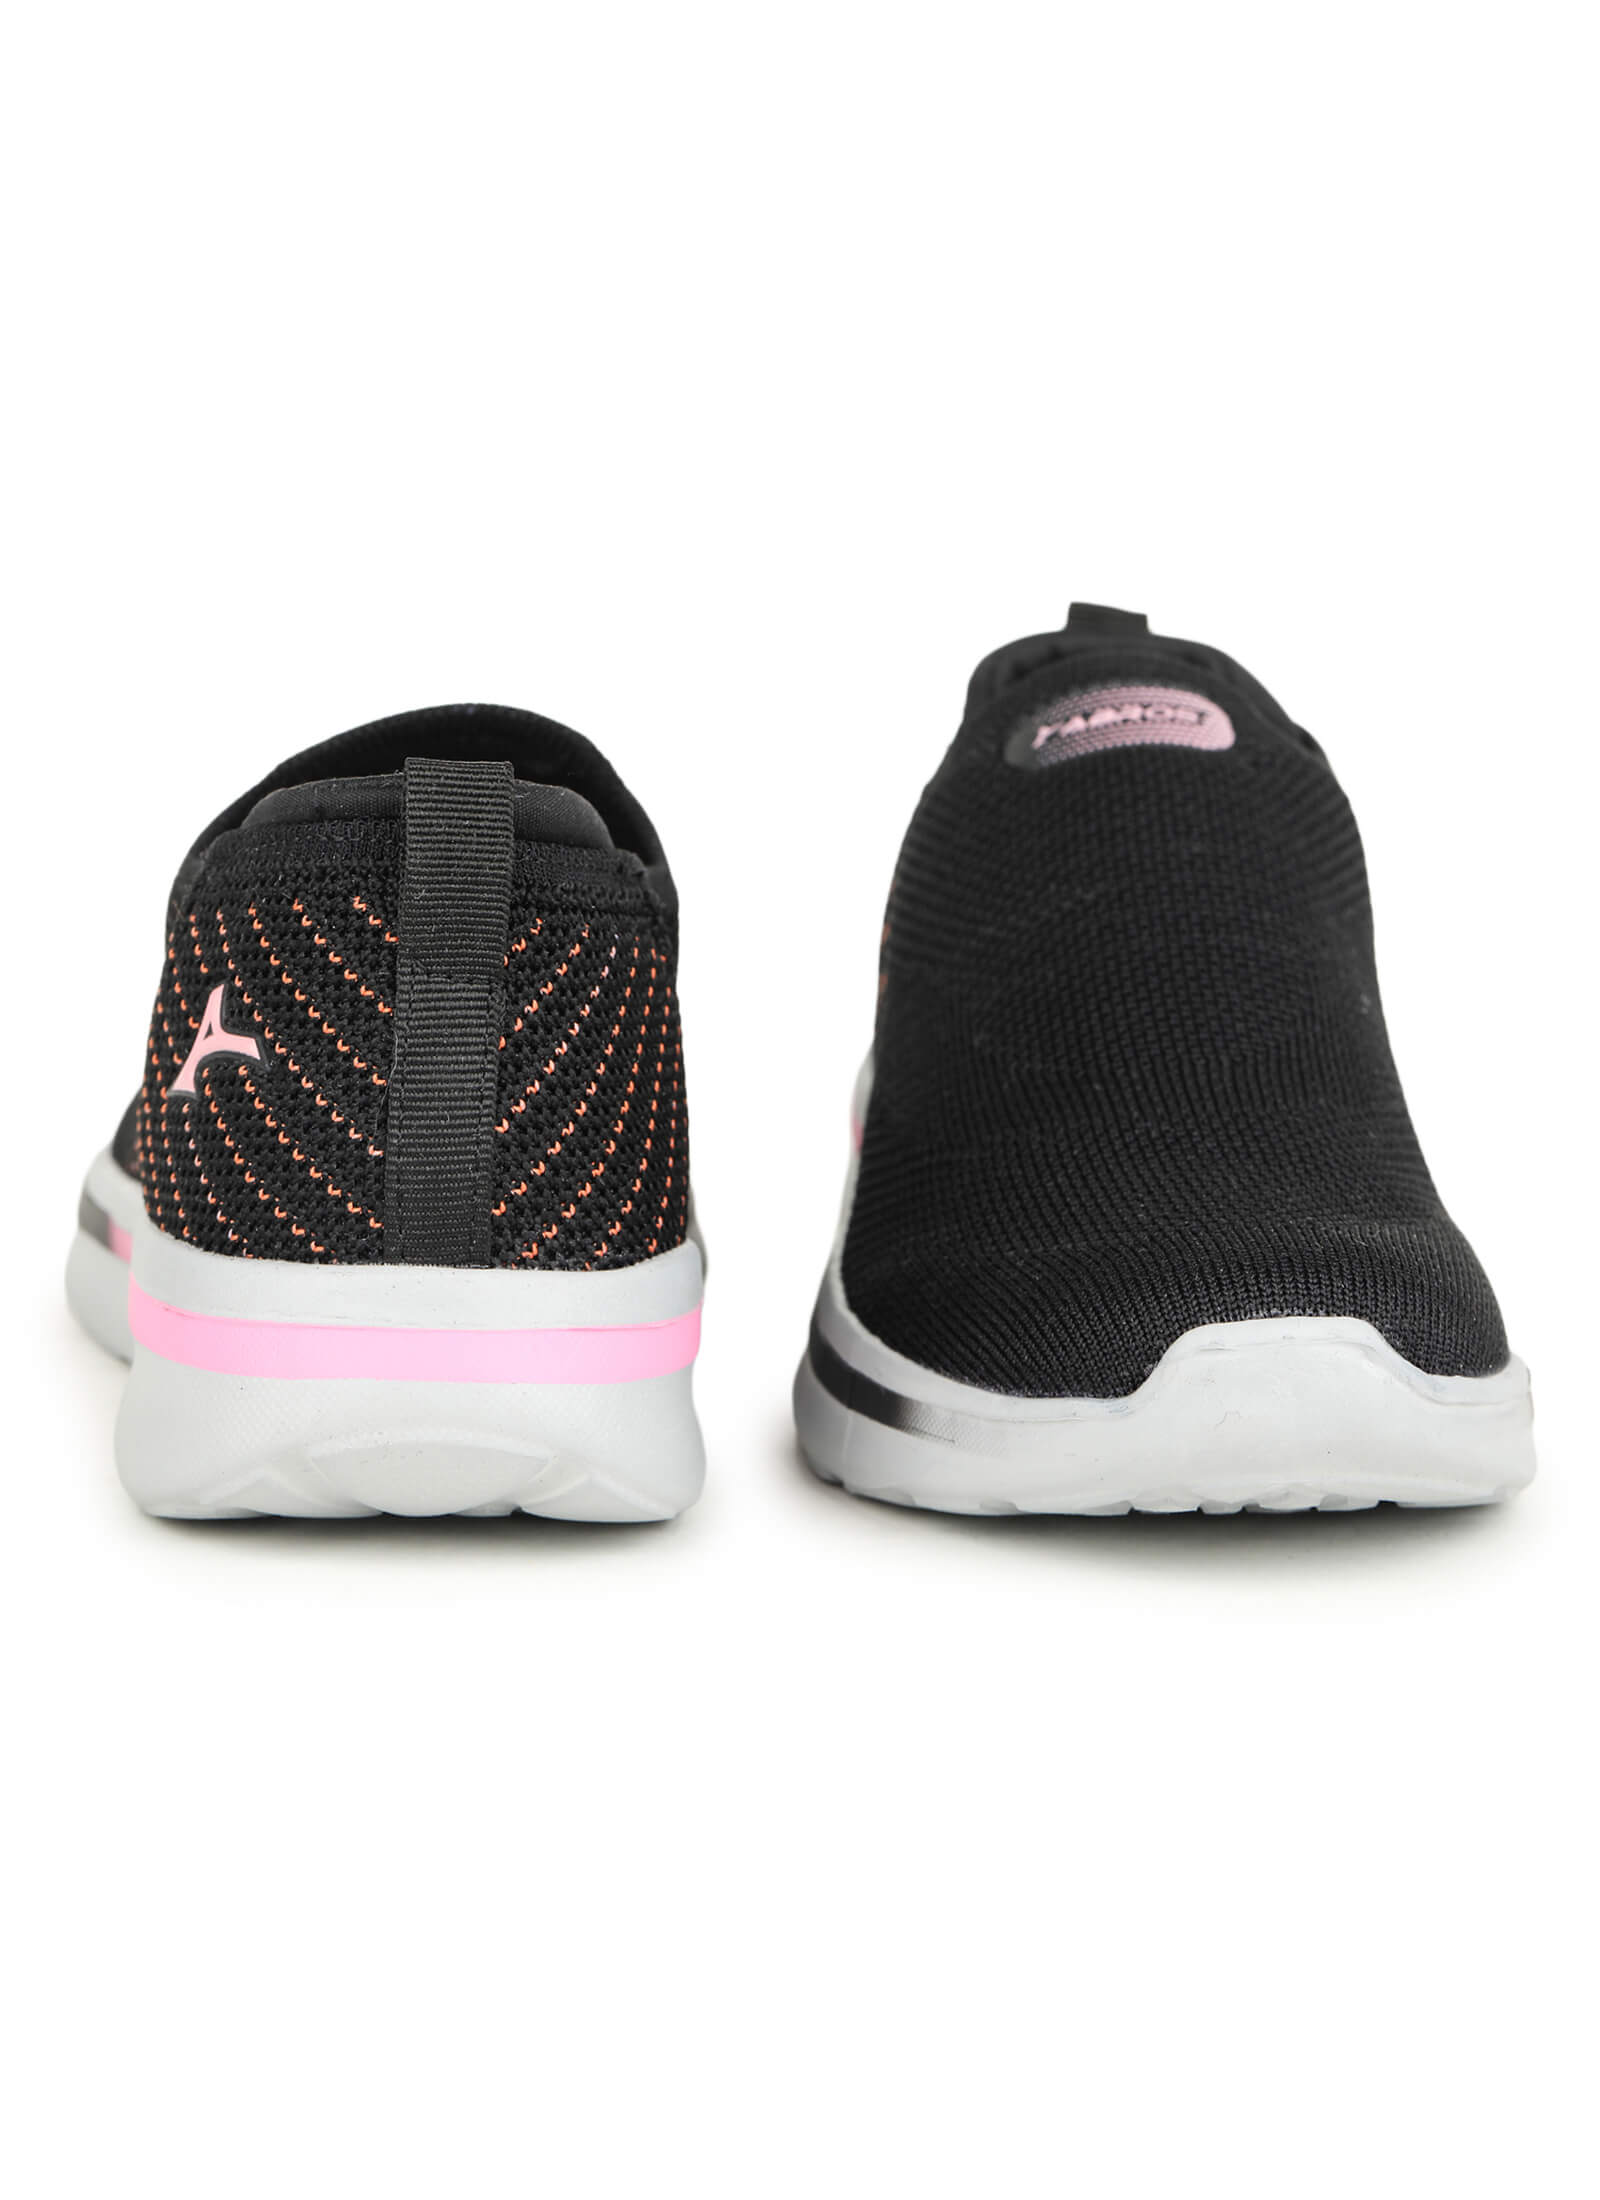 Alice-2 Sports Shoes For Women